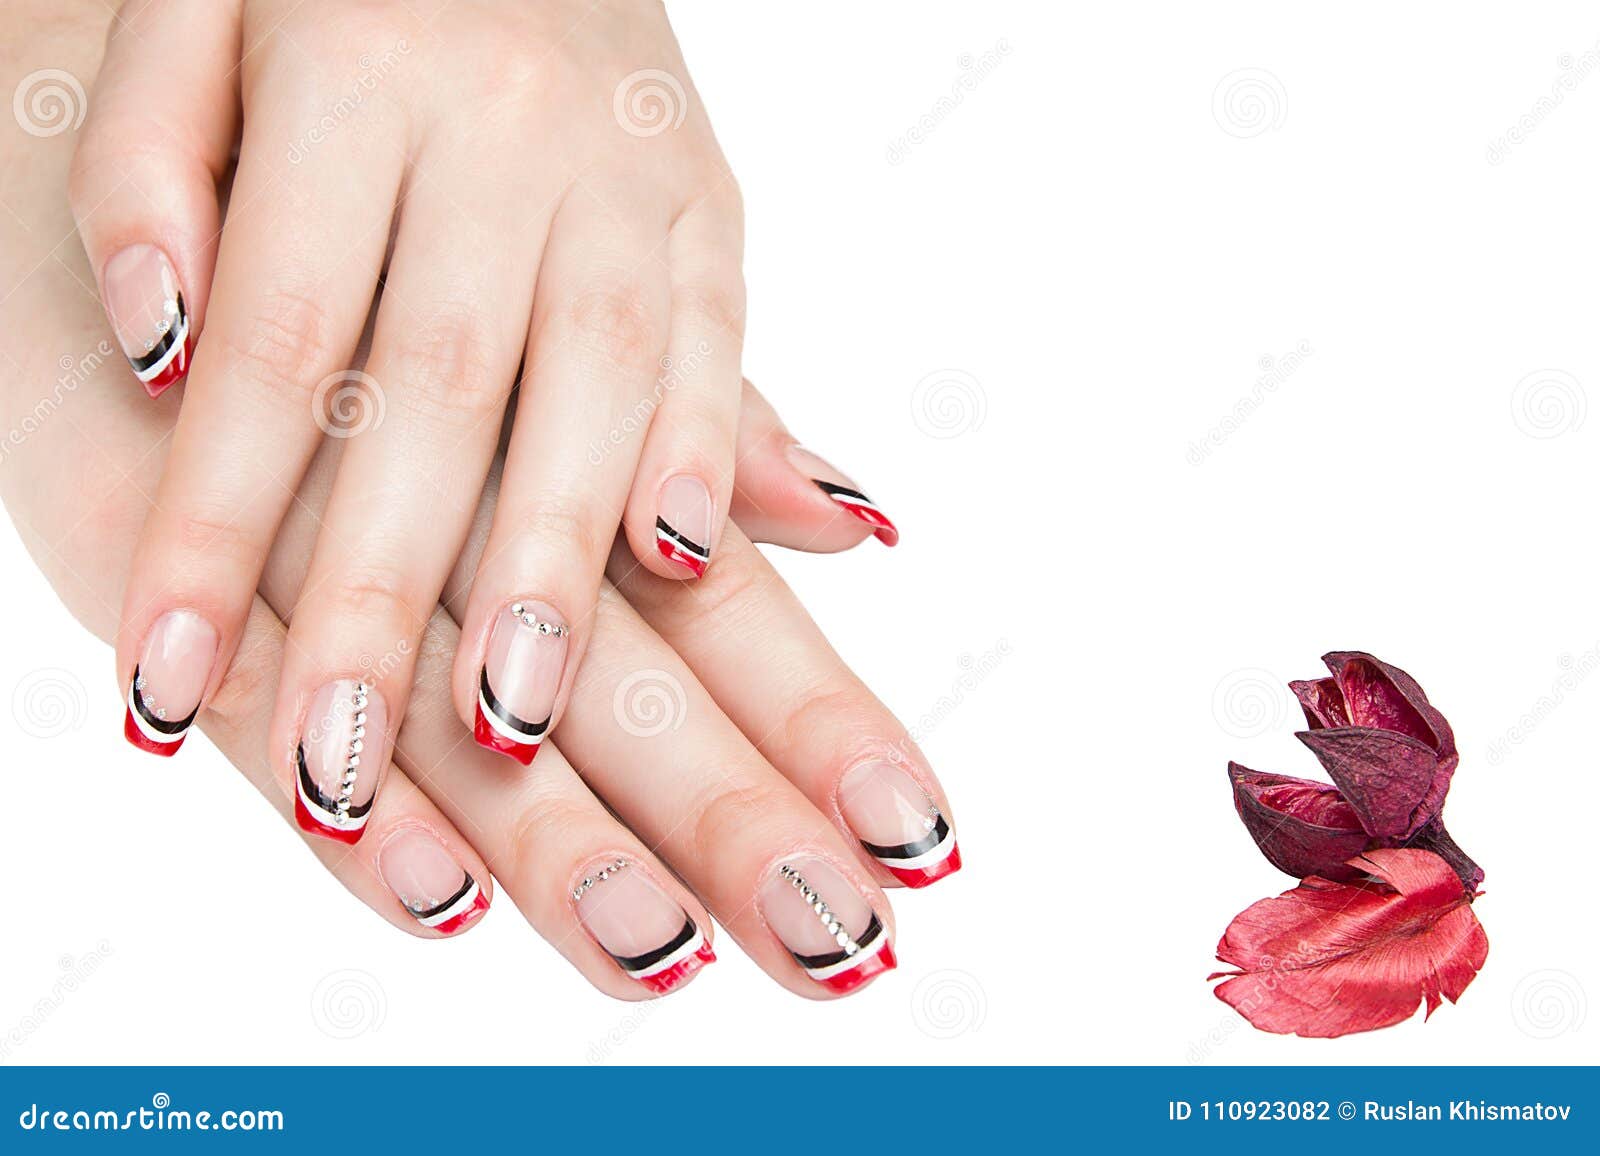 French Manicure - Beautiful Manicured Female Hands with Red Black and White  Manicure with Rhinestones Isolated on White Background Stock Photo - Image  of classy, manicured: 110923082